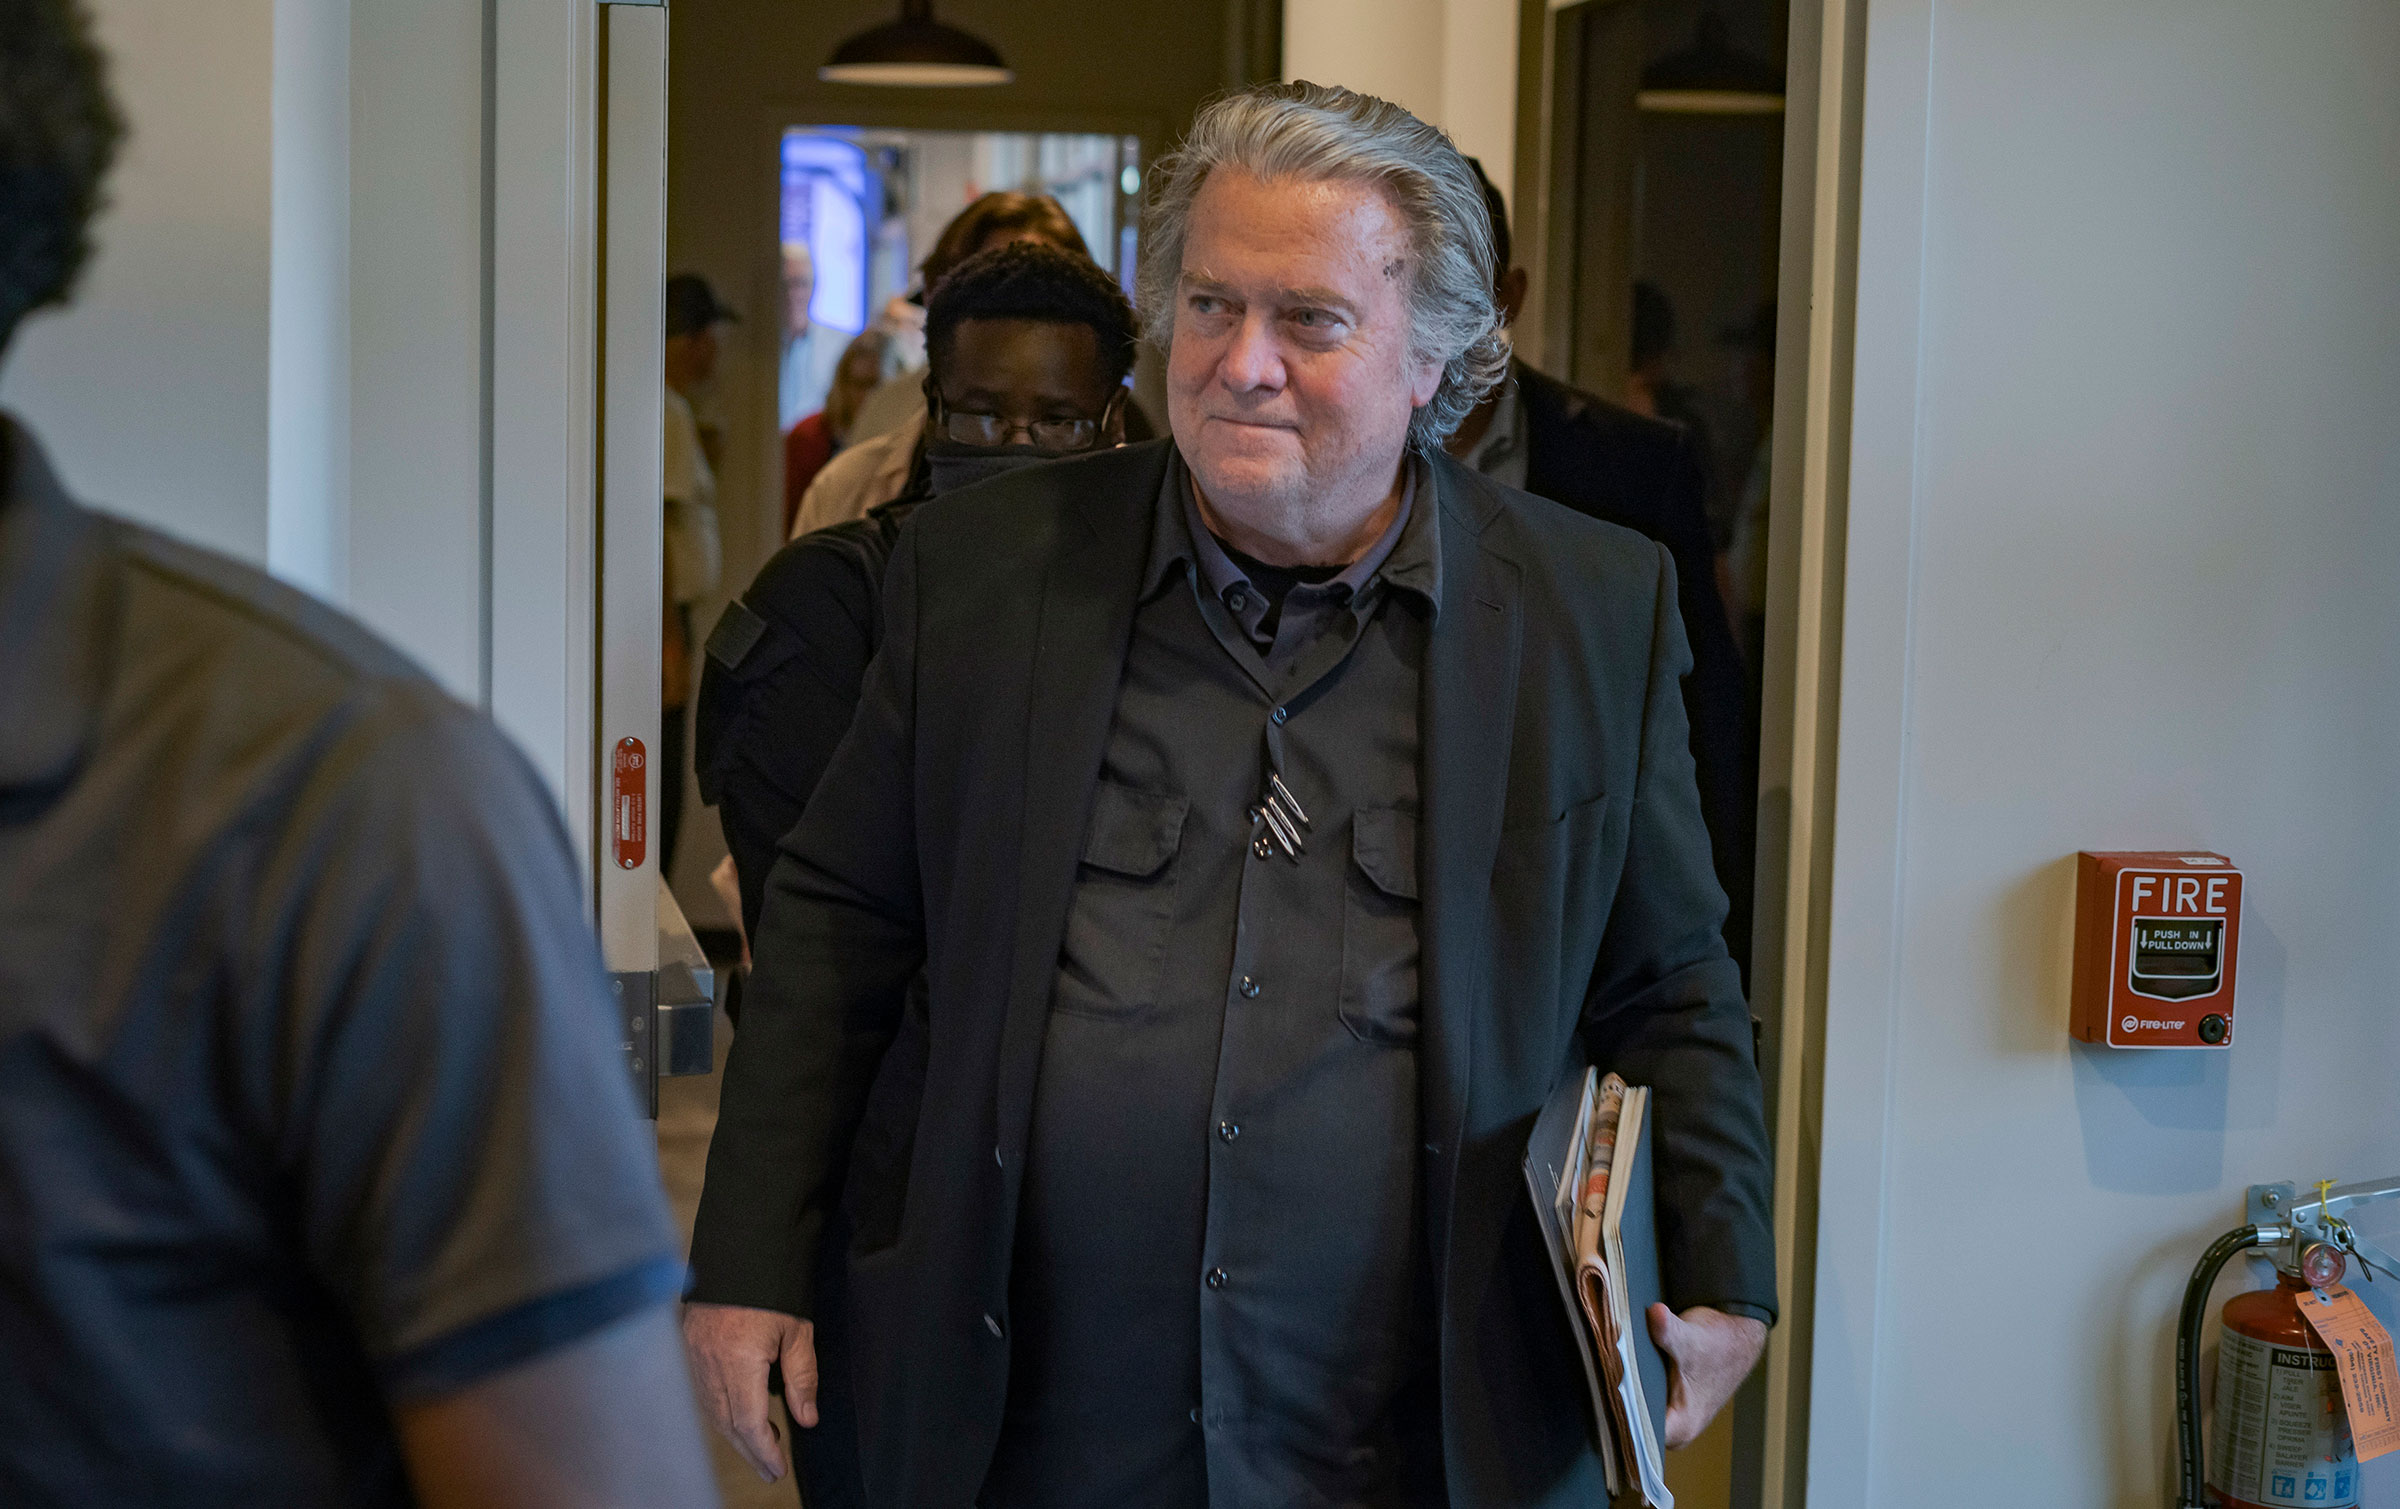 Steve Bannon, a former top adviser to then President Donald Trump, after speaking at a rally in Richmond, Va., Oct. 13, 2021. T (Carlos Bernate—The New York Times/Redux)